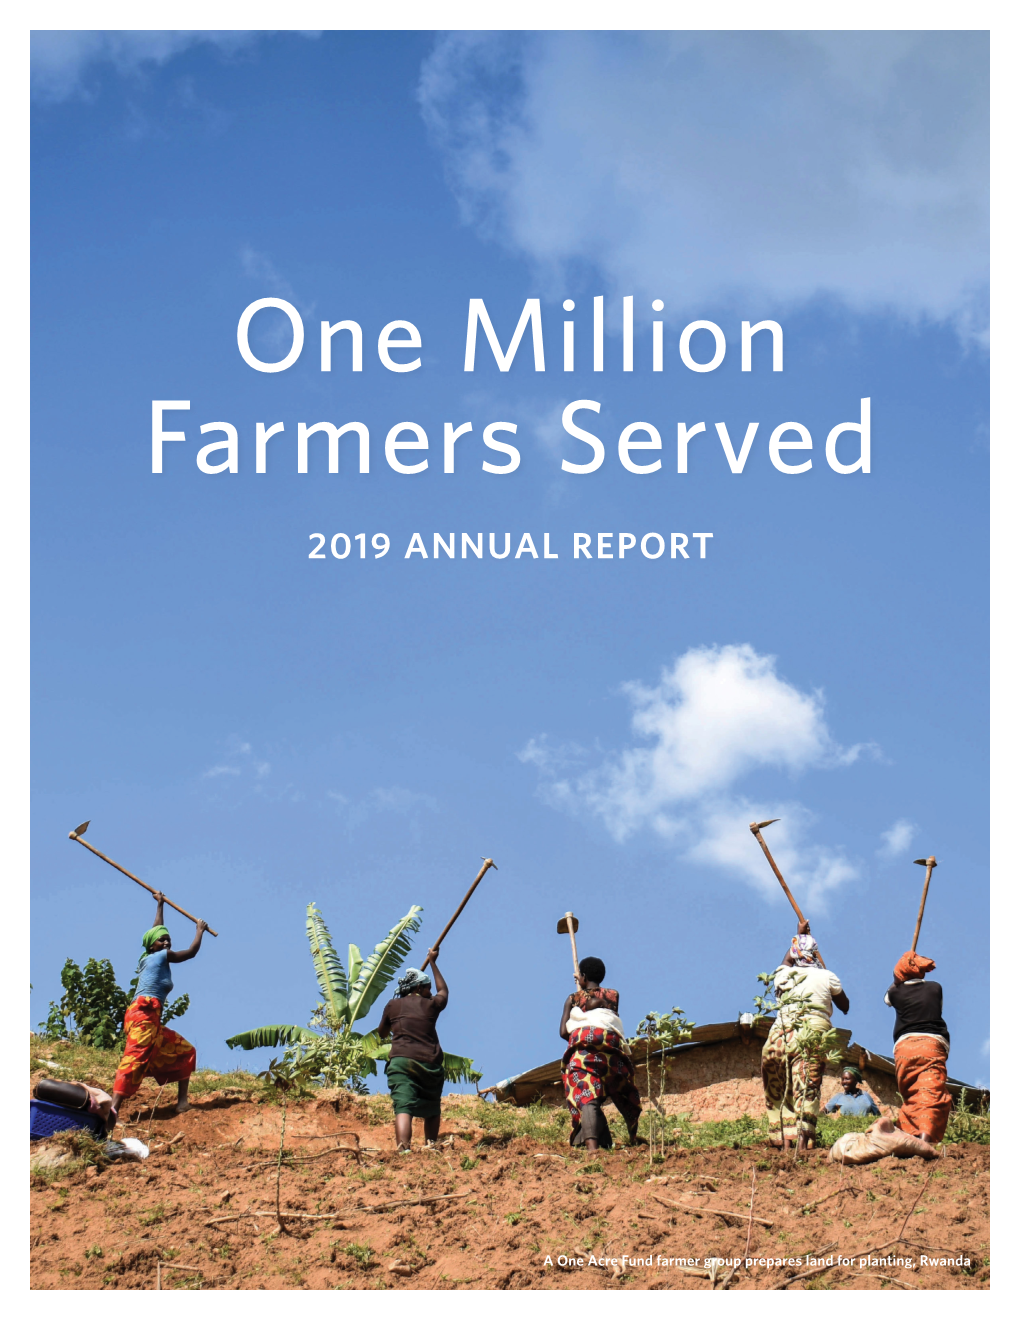 One Million Farmers Served 2019 ANNUAL REPORT